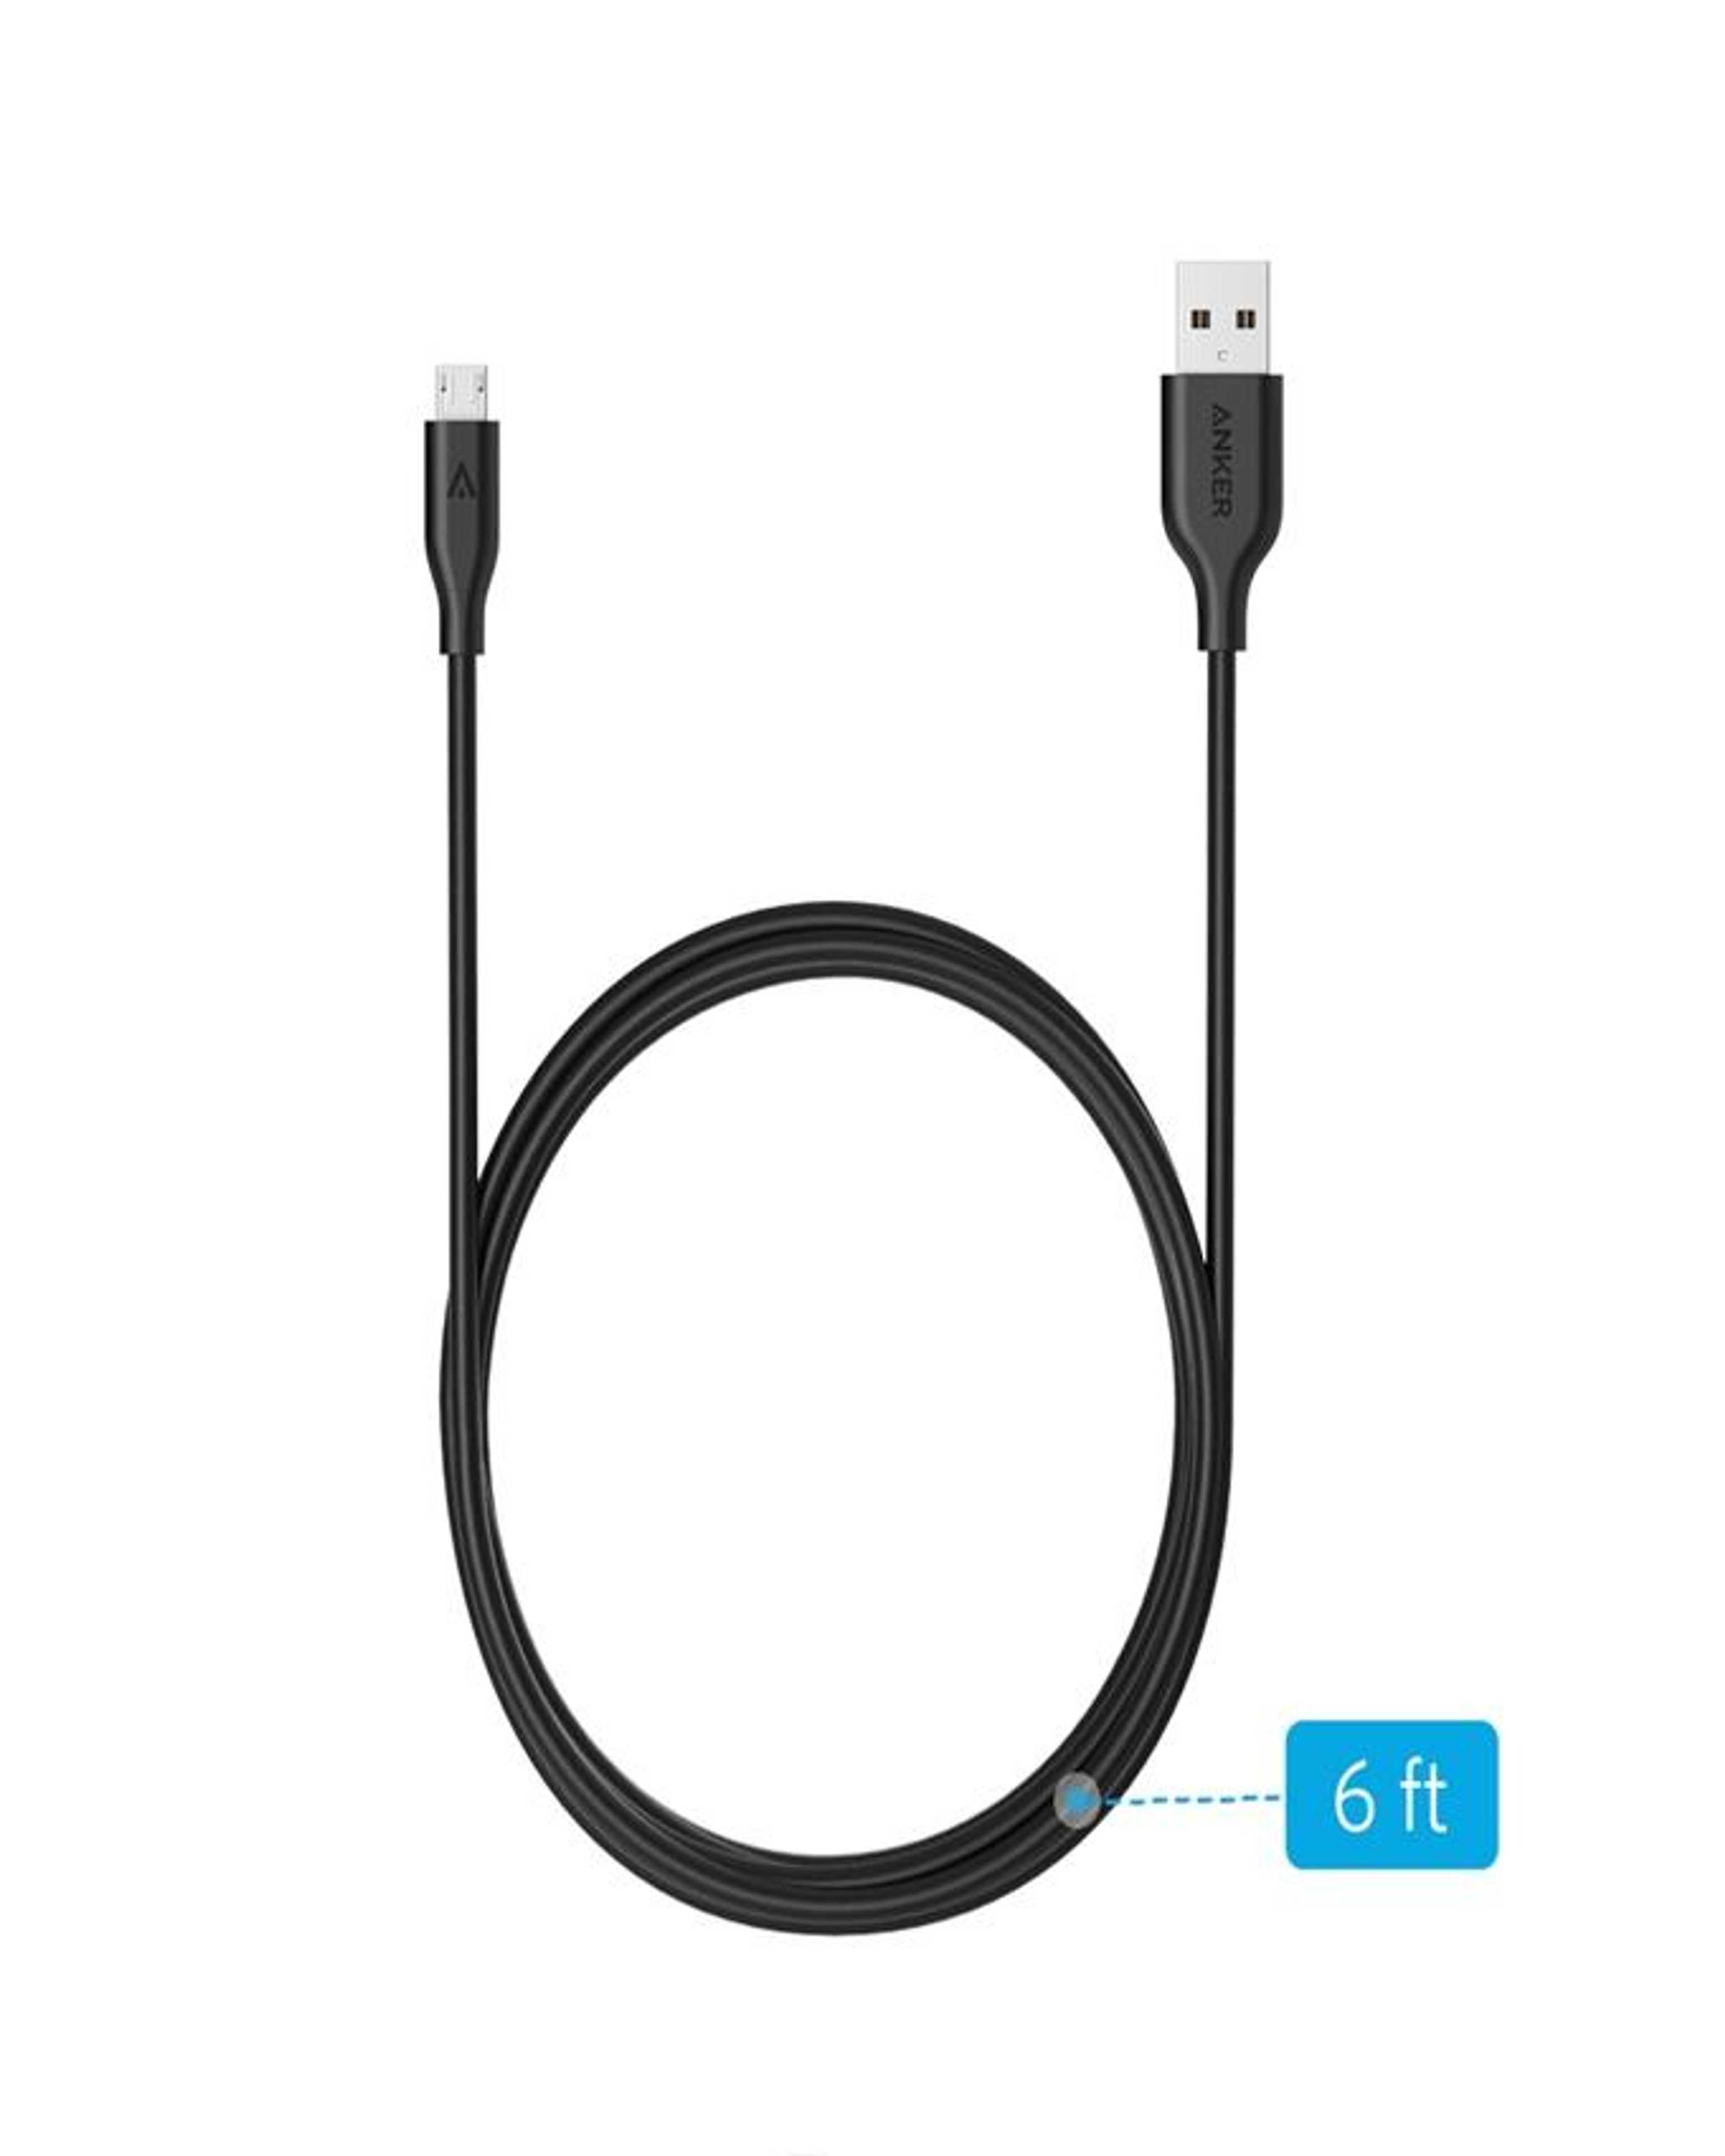 Anker A8133H11 - PowerLine Micro USB - 6ft